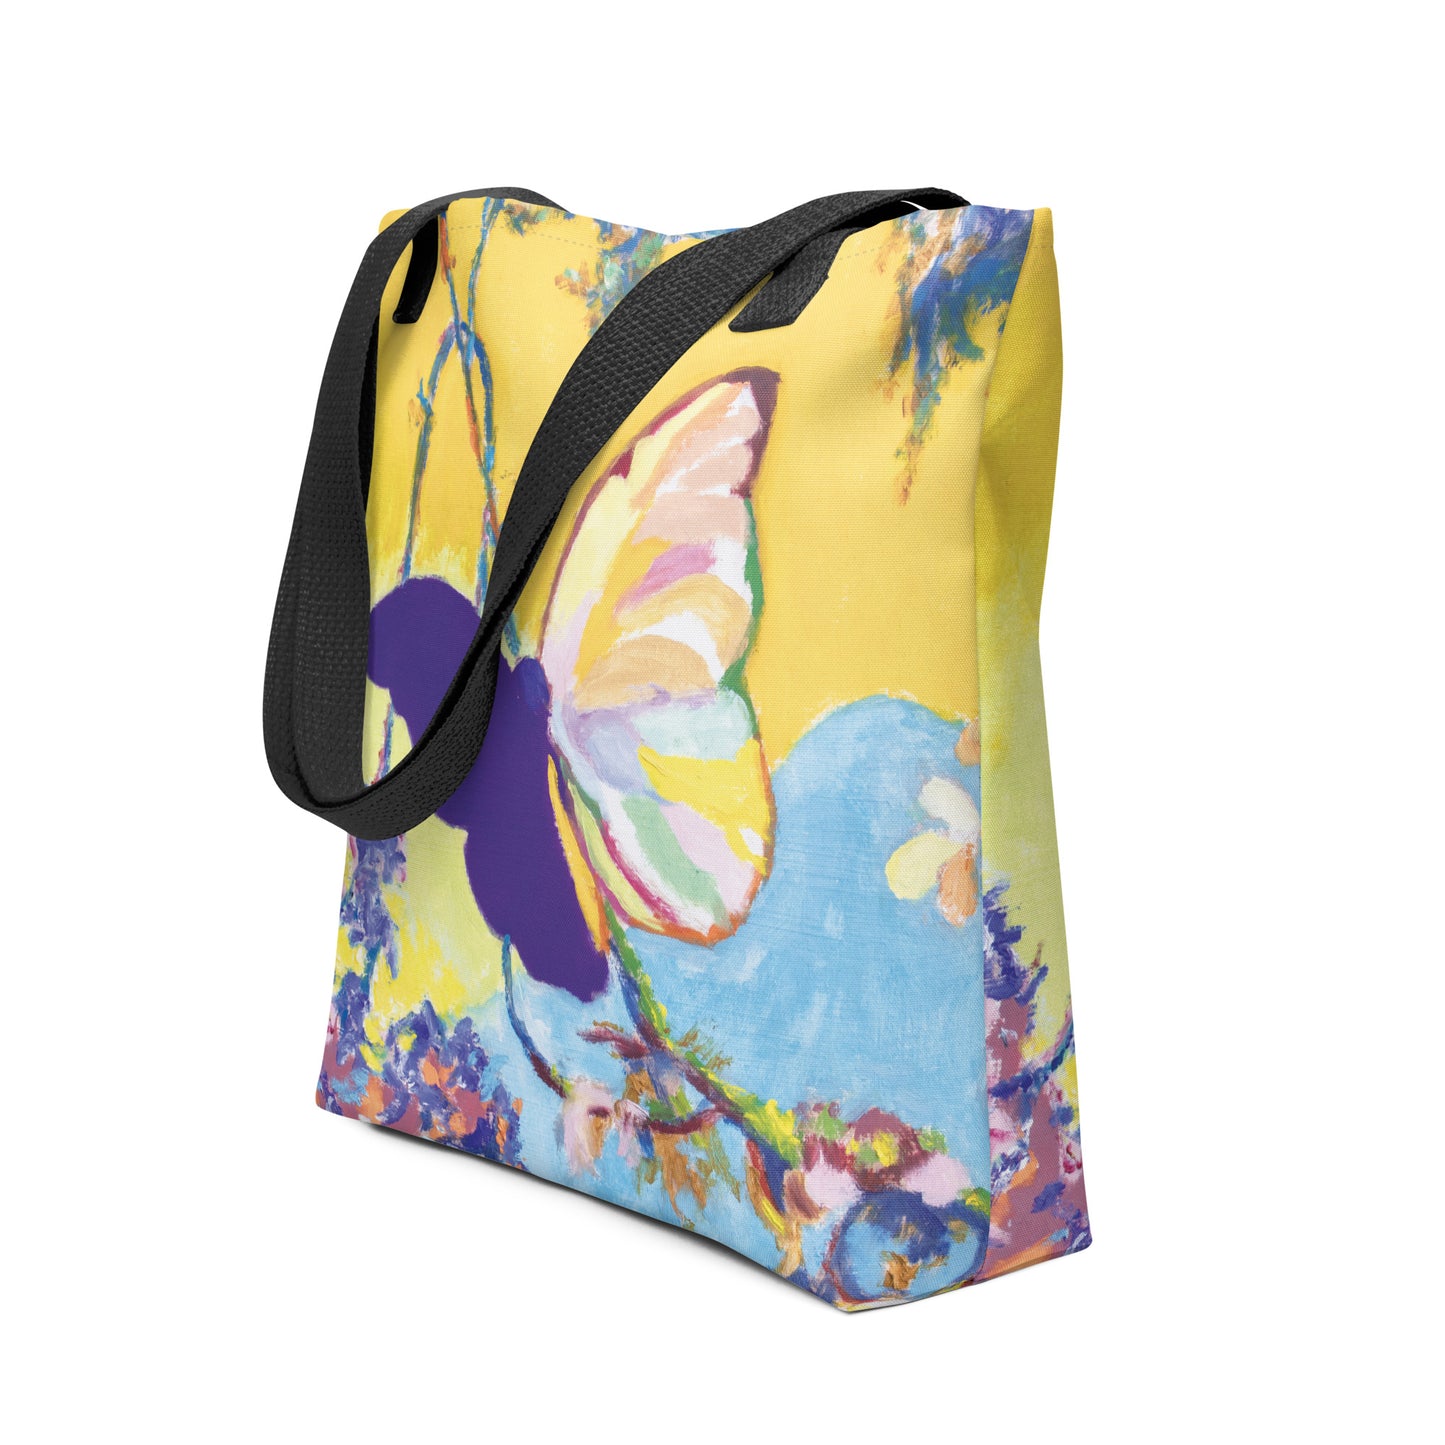 Dawn - Butterfly Tote Bag